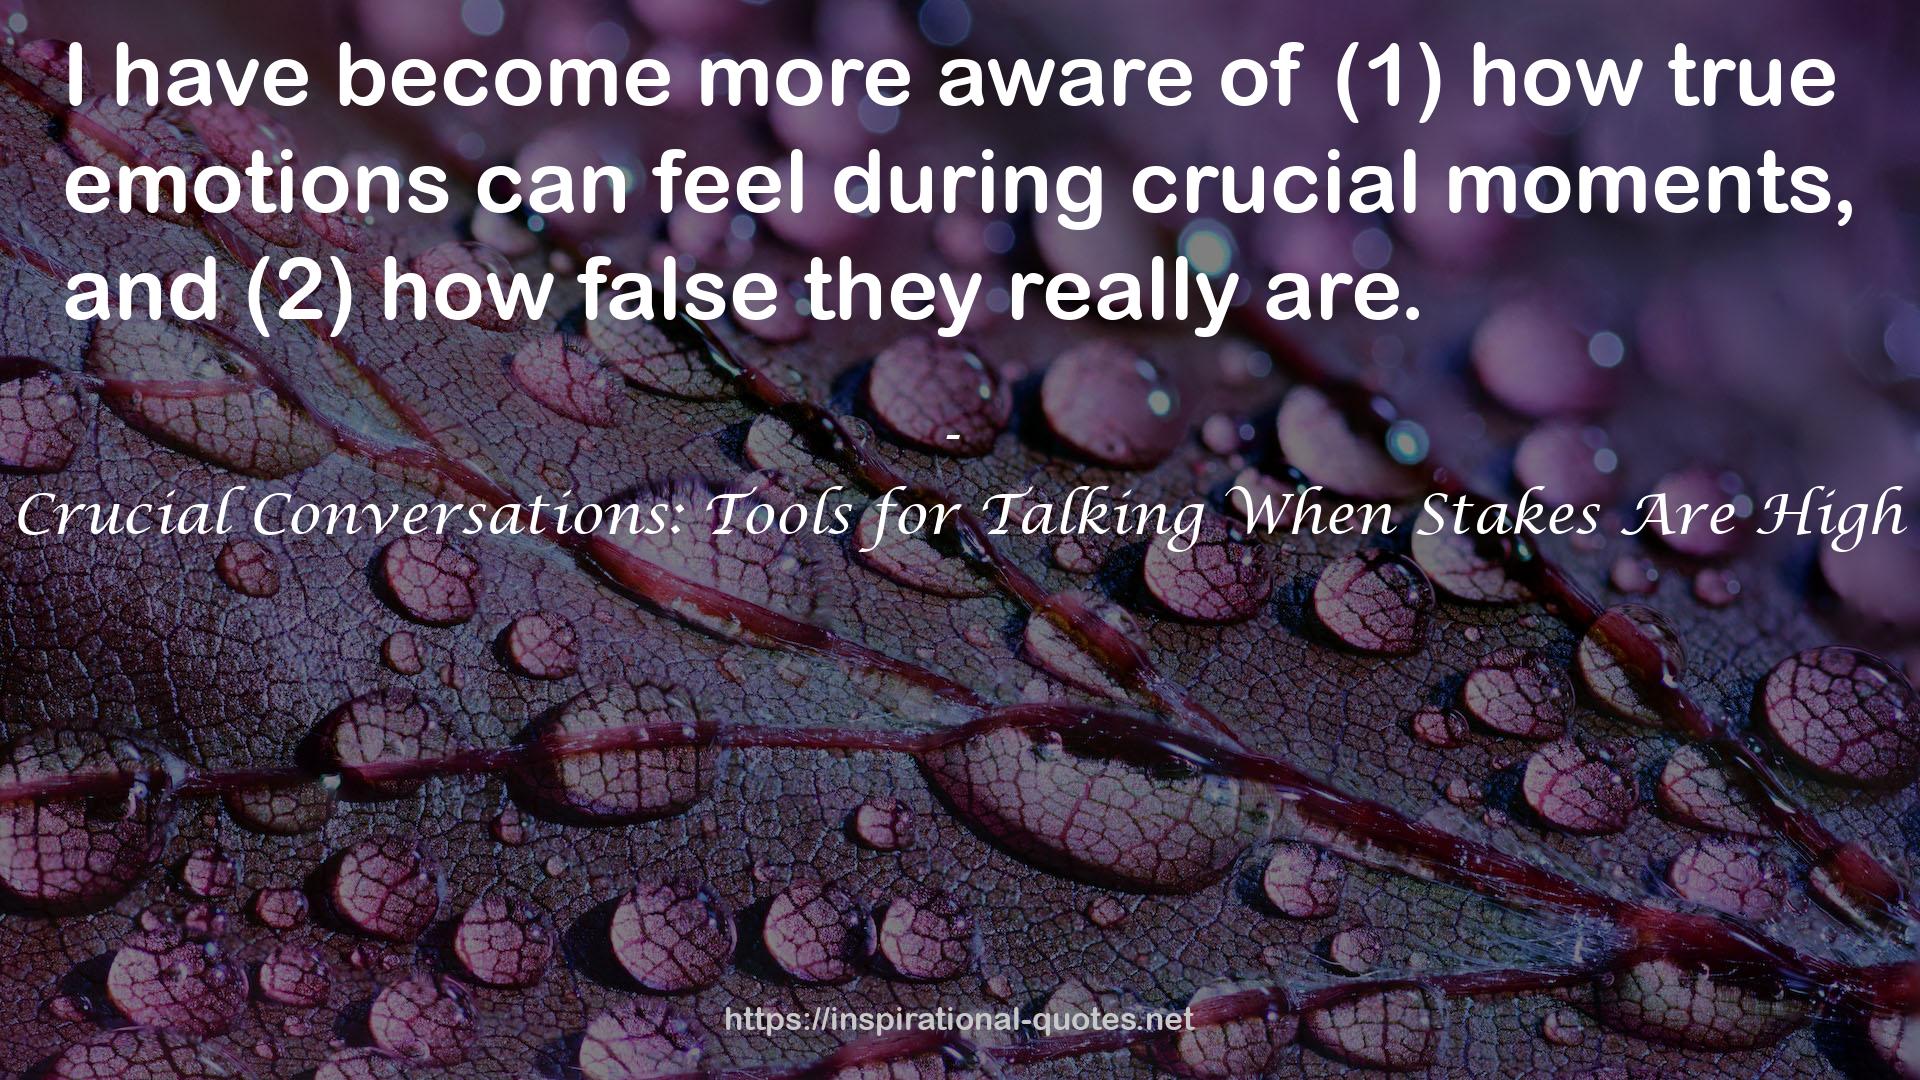 Crucial Conversations: Tools for Talking When Stakes Are High QUOTES